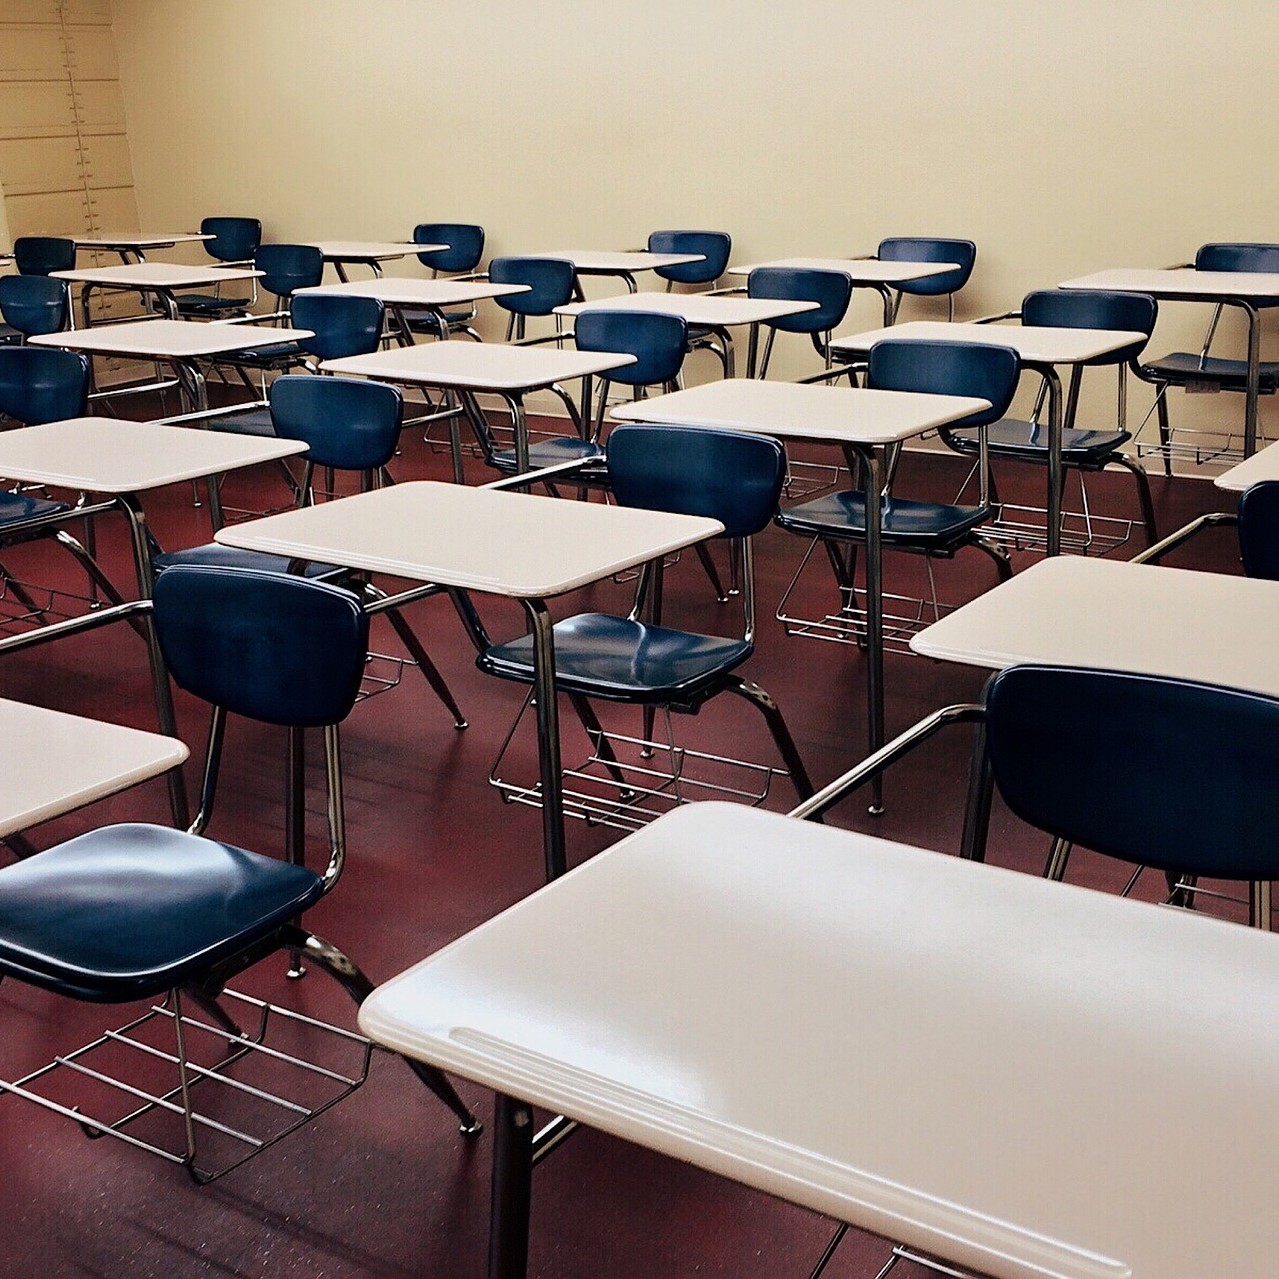 A photo of classroom desks and chairs lined up in rows, in an exam hall.